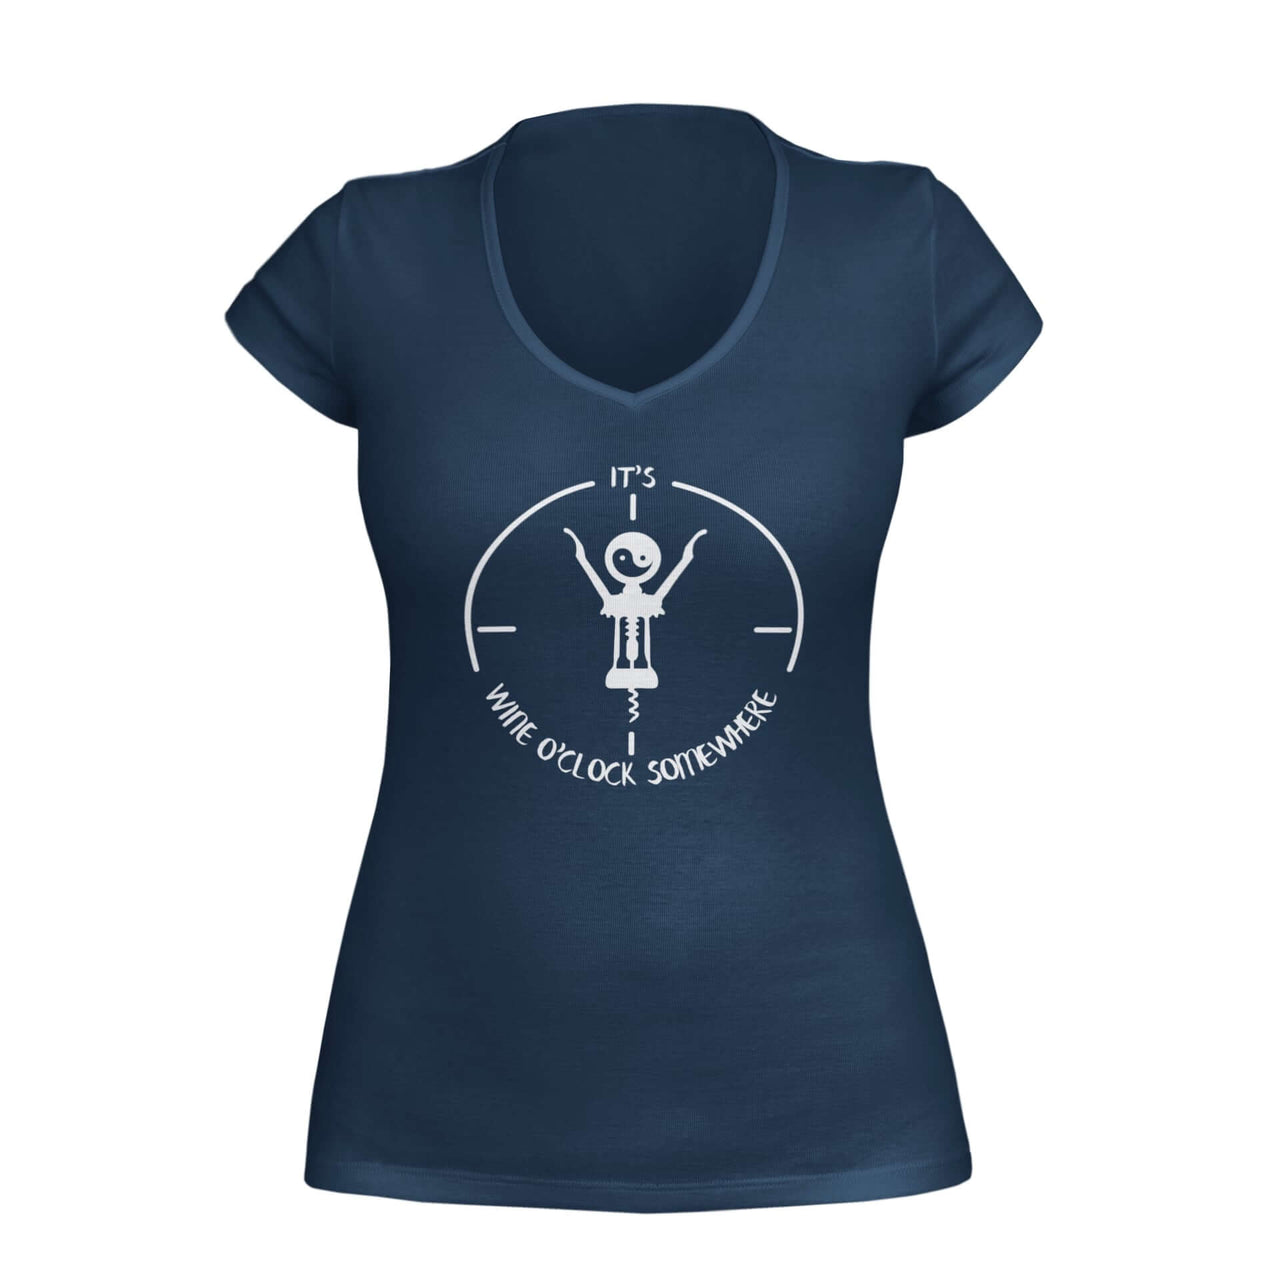 Navy VNeck T-shirt featuring the text 'It's wine o'clock somewhere,' accompanied by an image of a wine cork as the hands of a clock, with a yin yang symbol on the face. Designed by WooHoo Apparel.